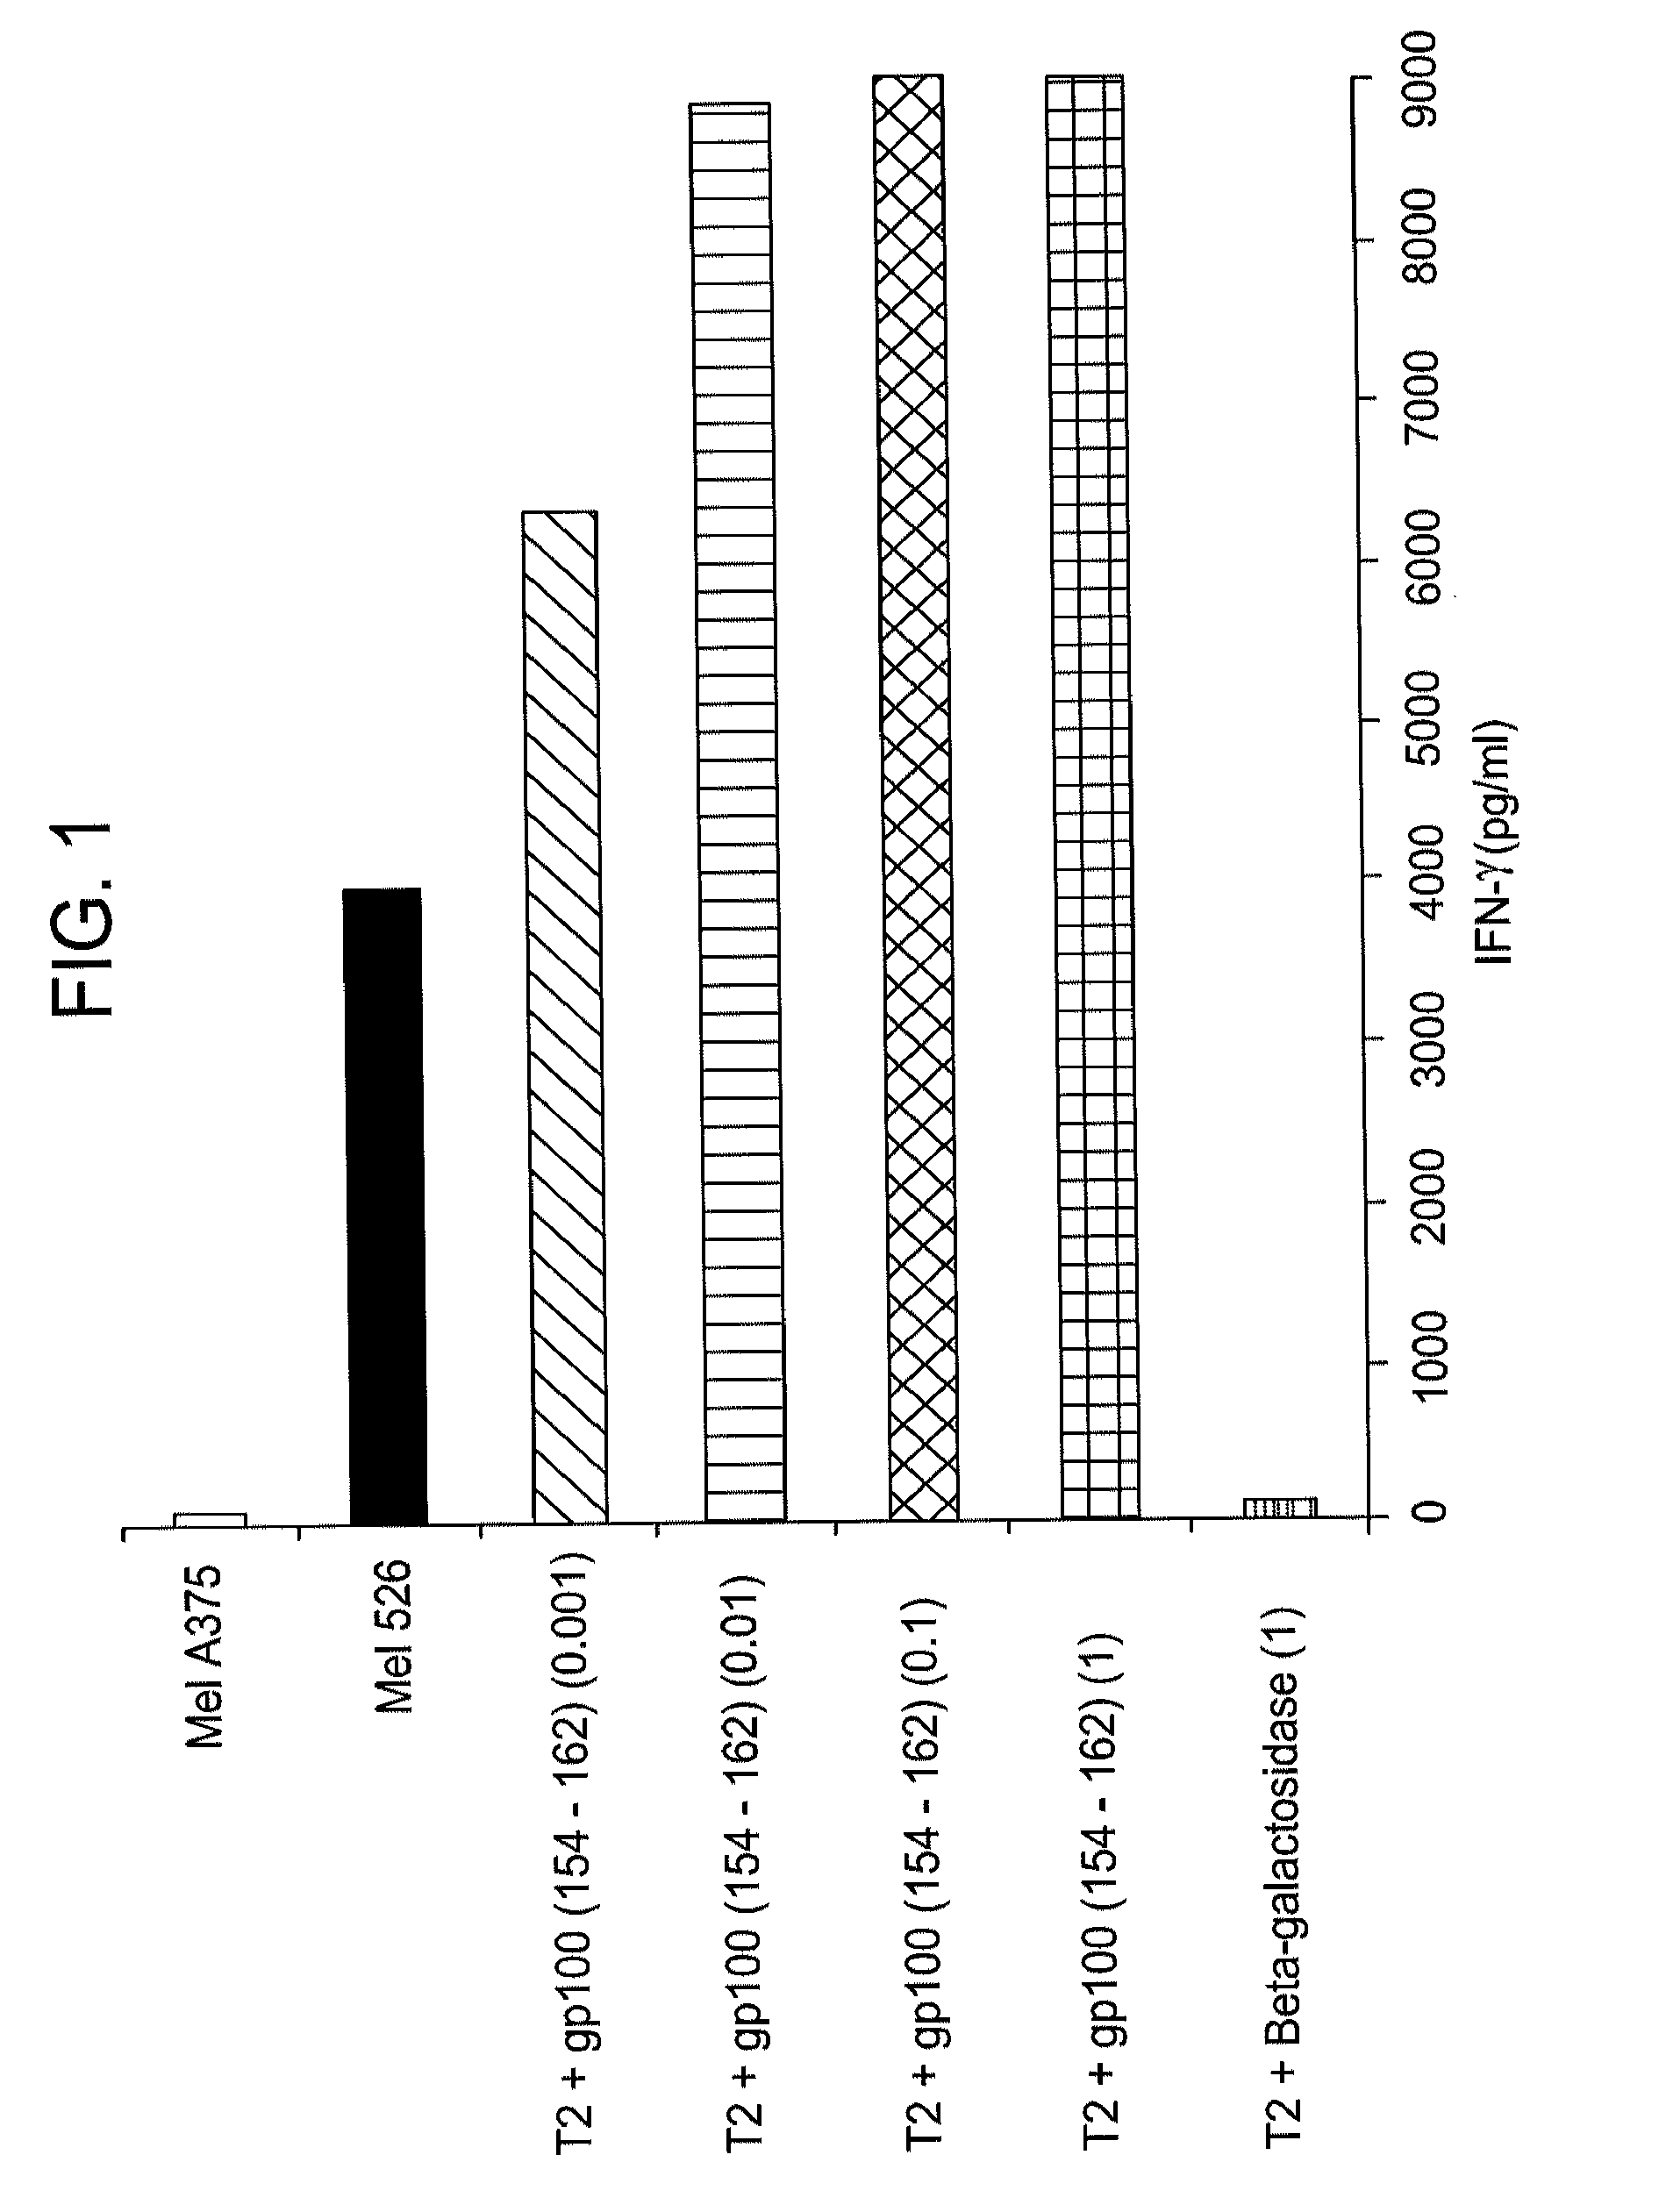 Gp100-specific t cell receptors and related materials and methods of use